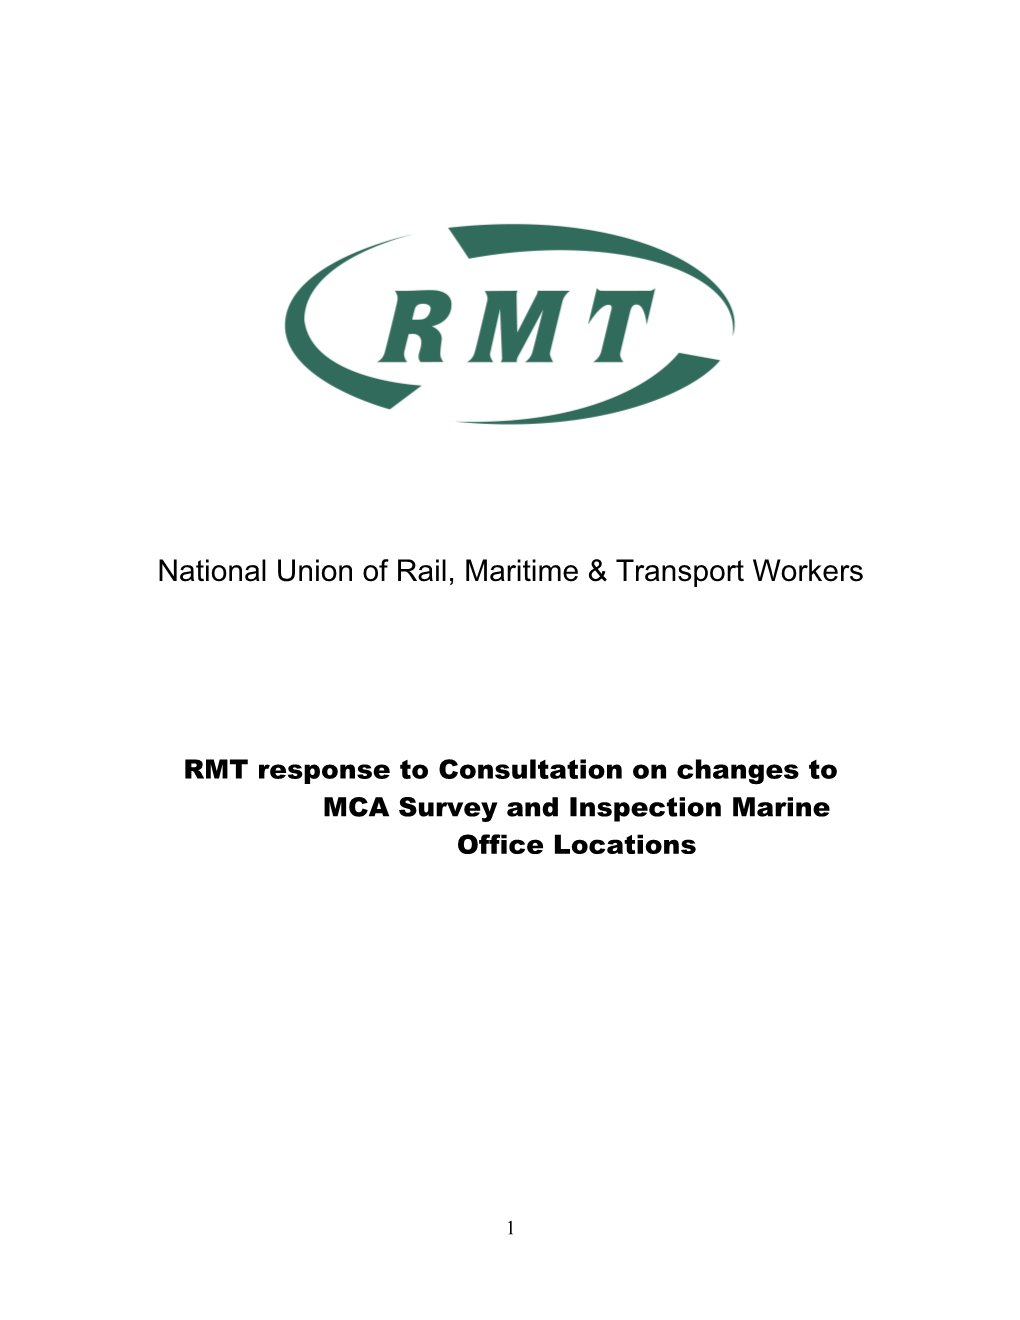 National Union of Rail, Maritime and Transport Workers